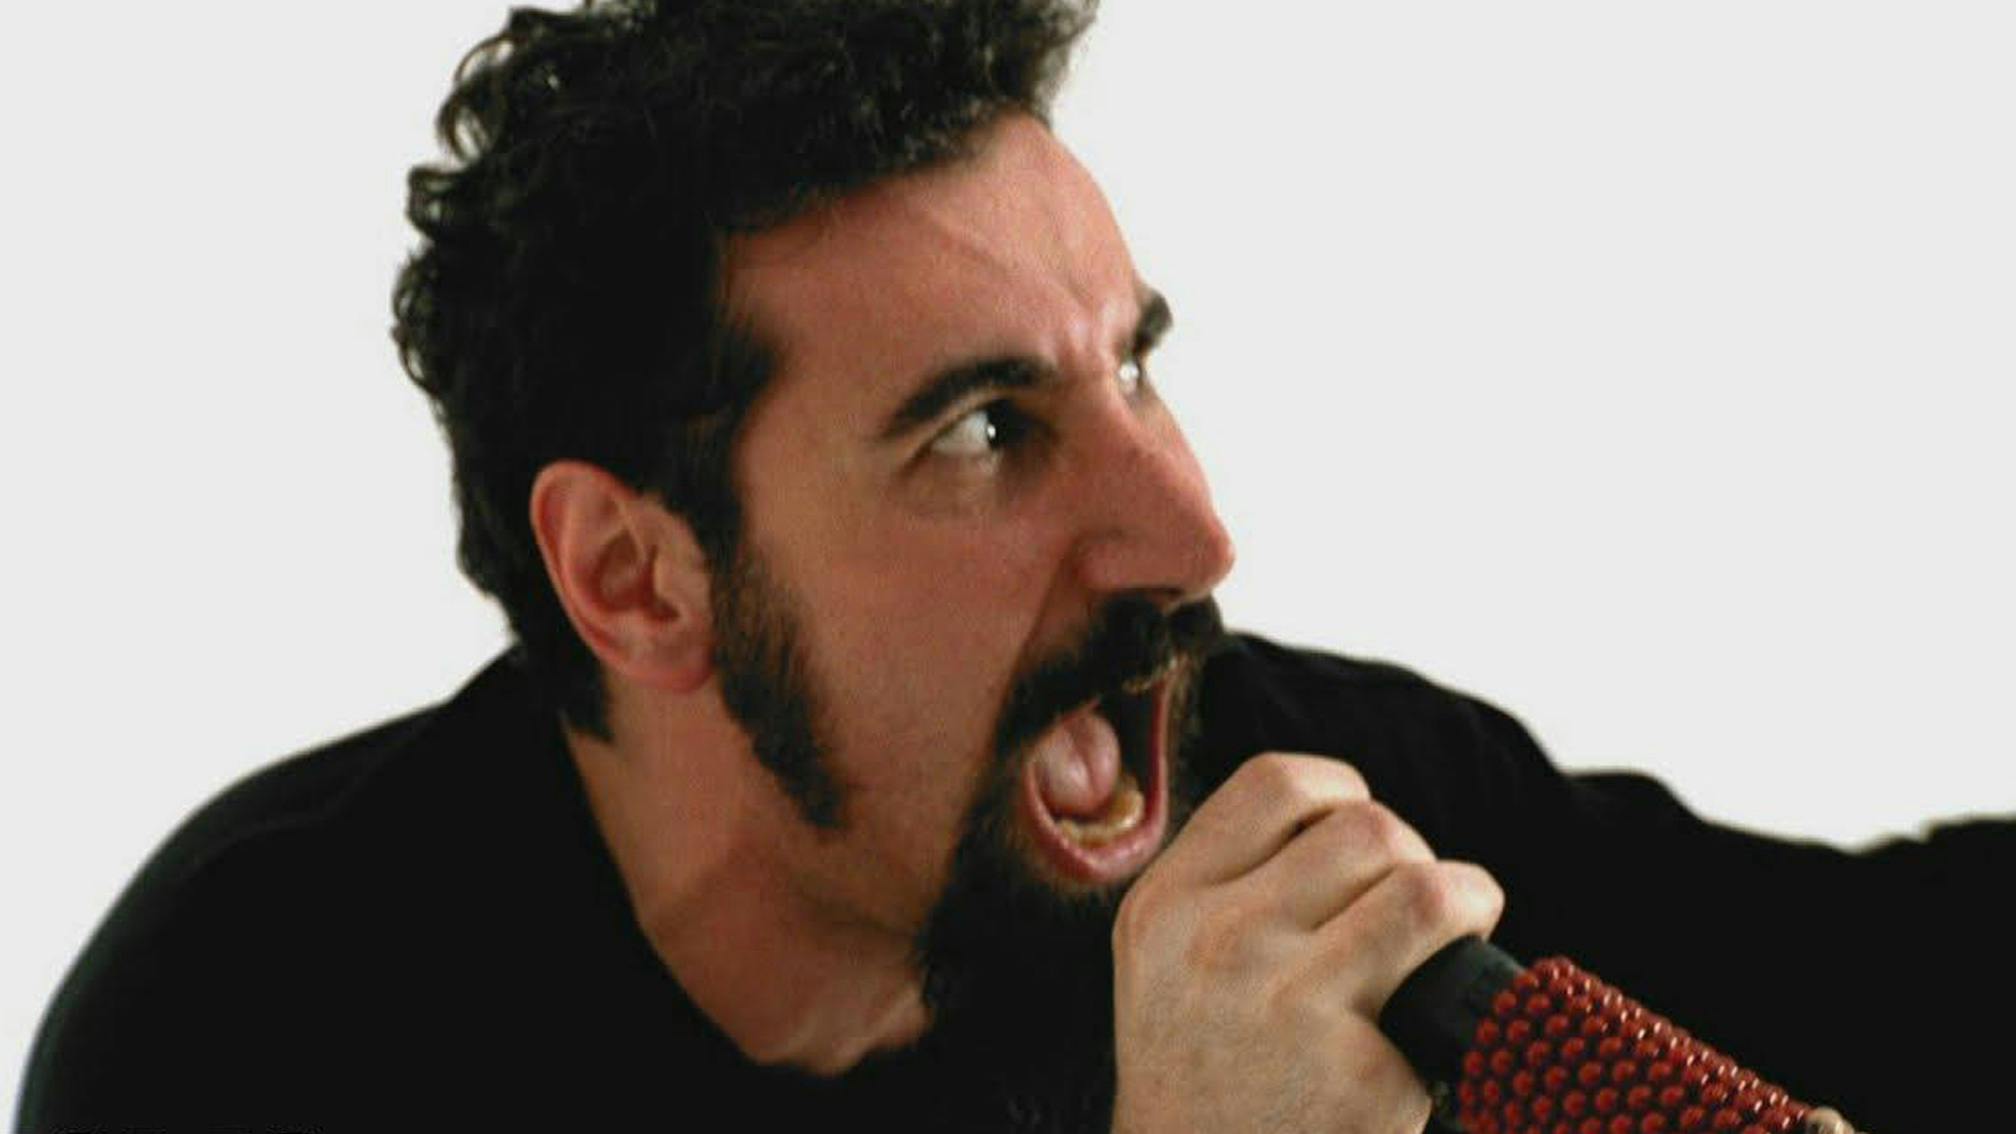 "Simply Awesome": Serj Tankian Comments On Viral Nigerian Wedding Sing-Along To Toxicity